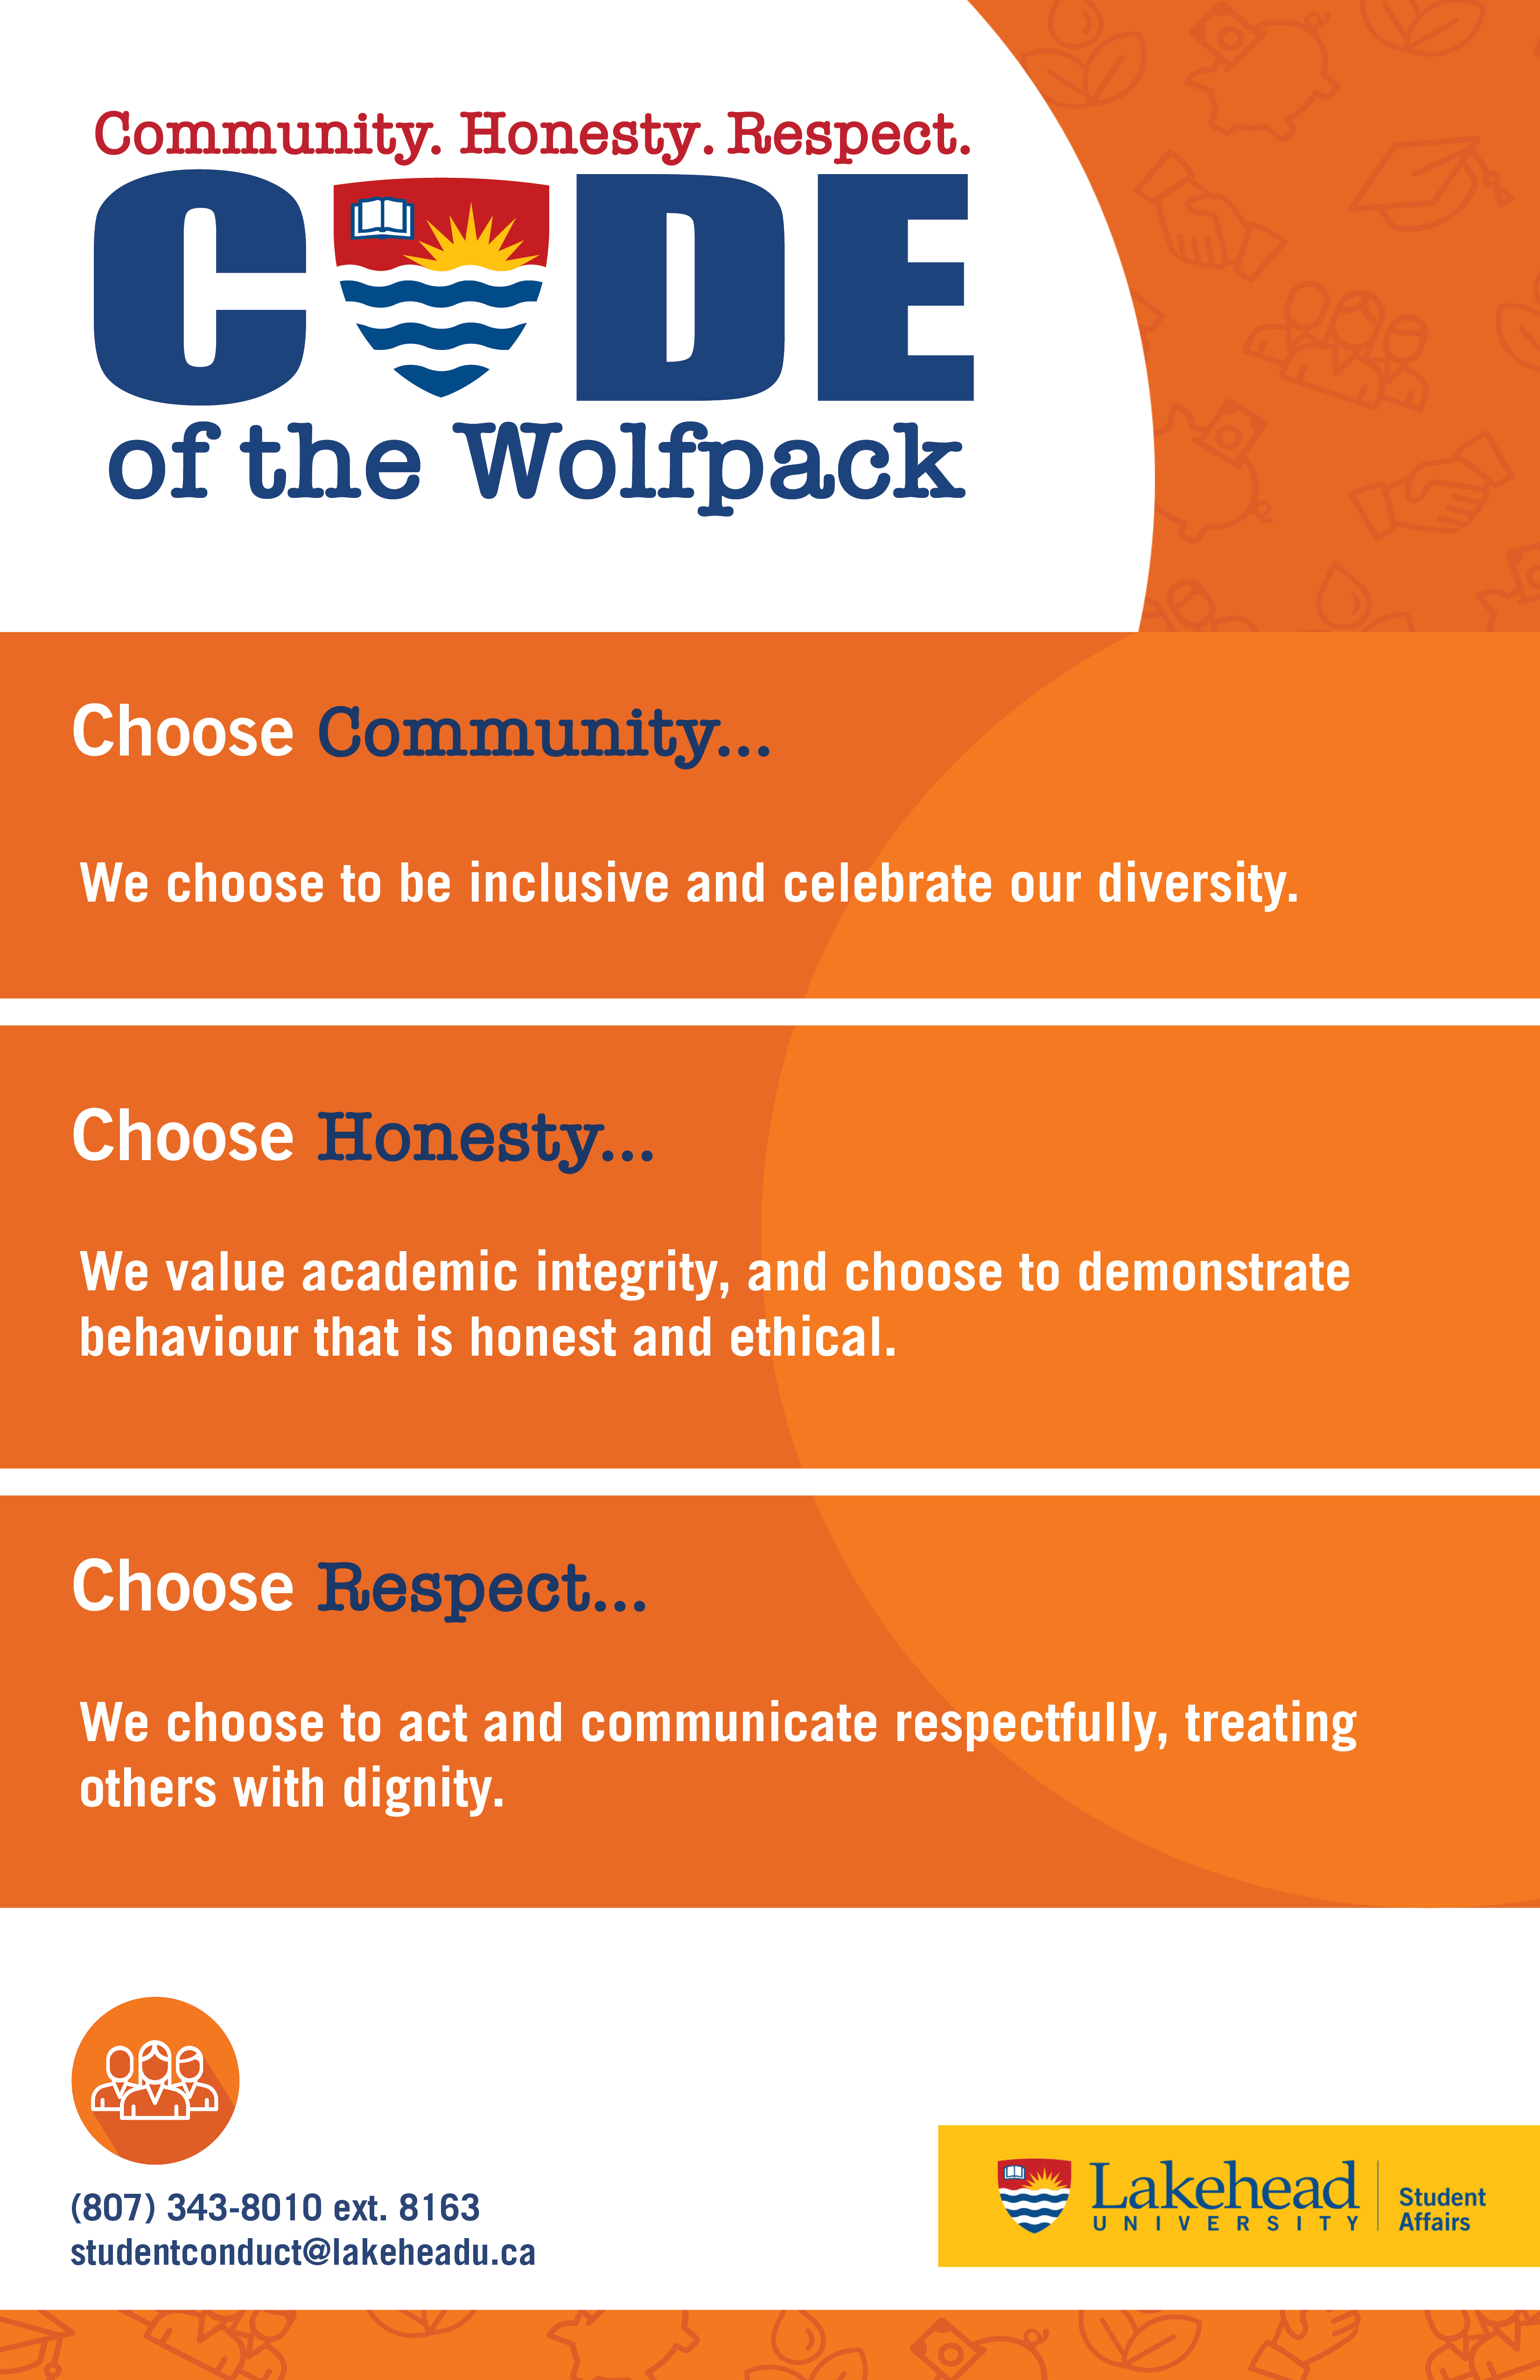 Code of the Wolfpack Poster with three values- Community, Honesty and Respect. Choose Community: We choose to be inclusive and celebrate our diversity. Choose Honesty: We value academic integrity, and choose to demonstrate behaviour that is honest and ethical. Choose Respect: We choose to act and communicate respectfully, treating others with dignity.